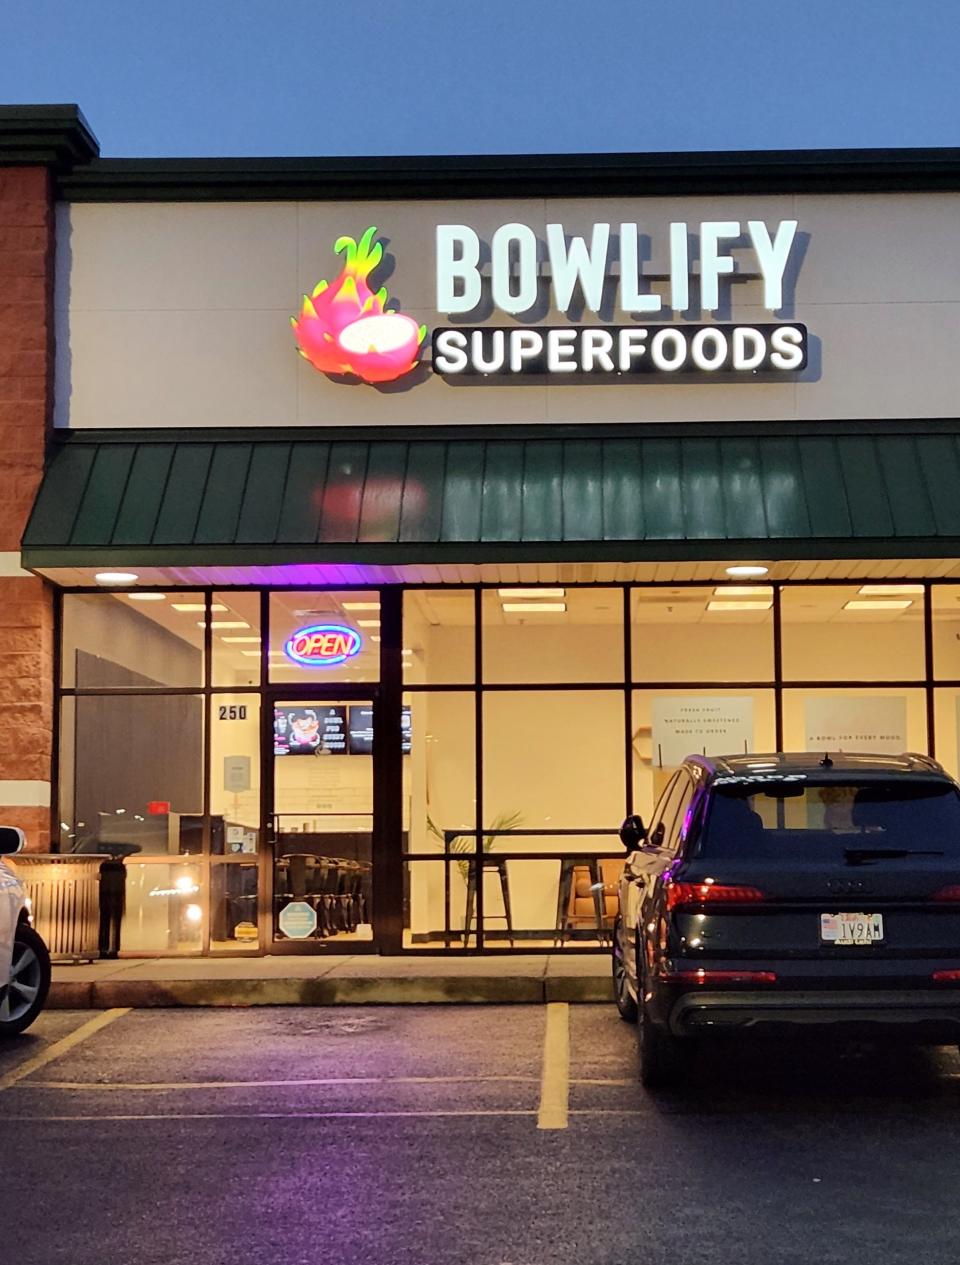 Bowlify Superfoods is located on Burkhardt Road in Evansville.